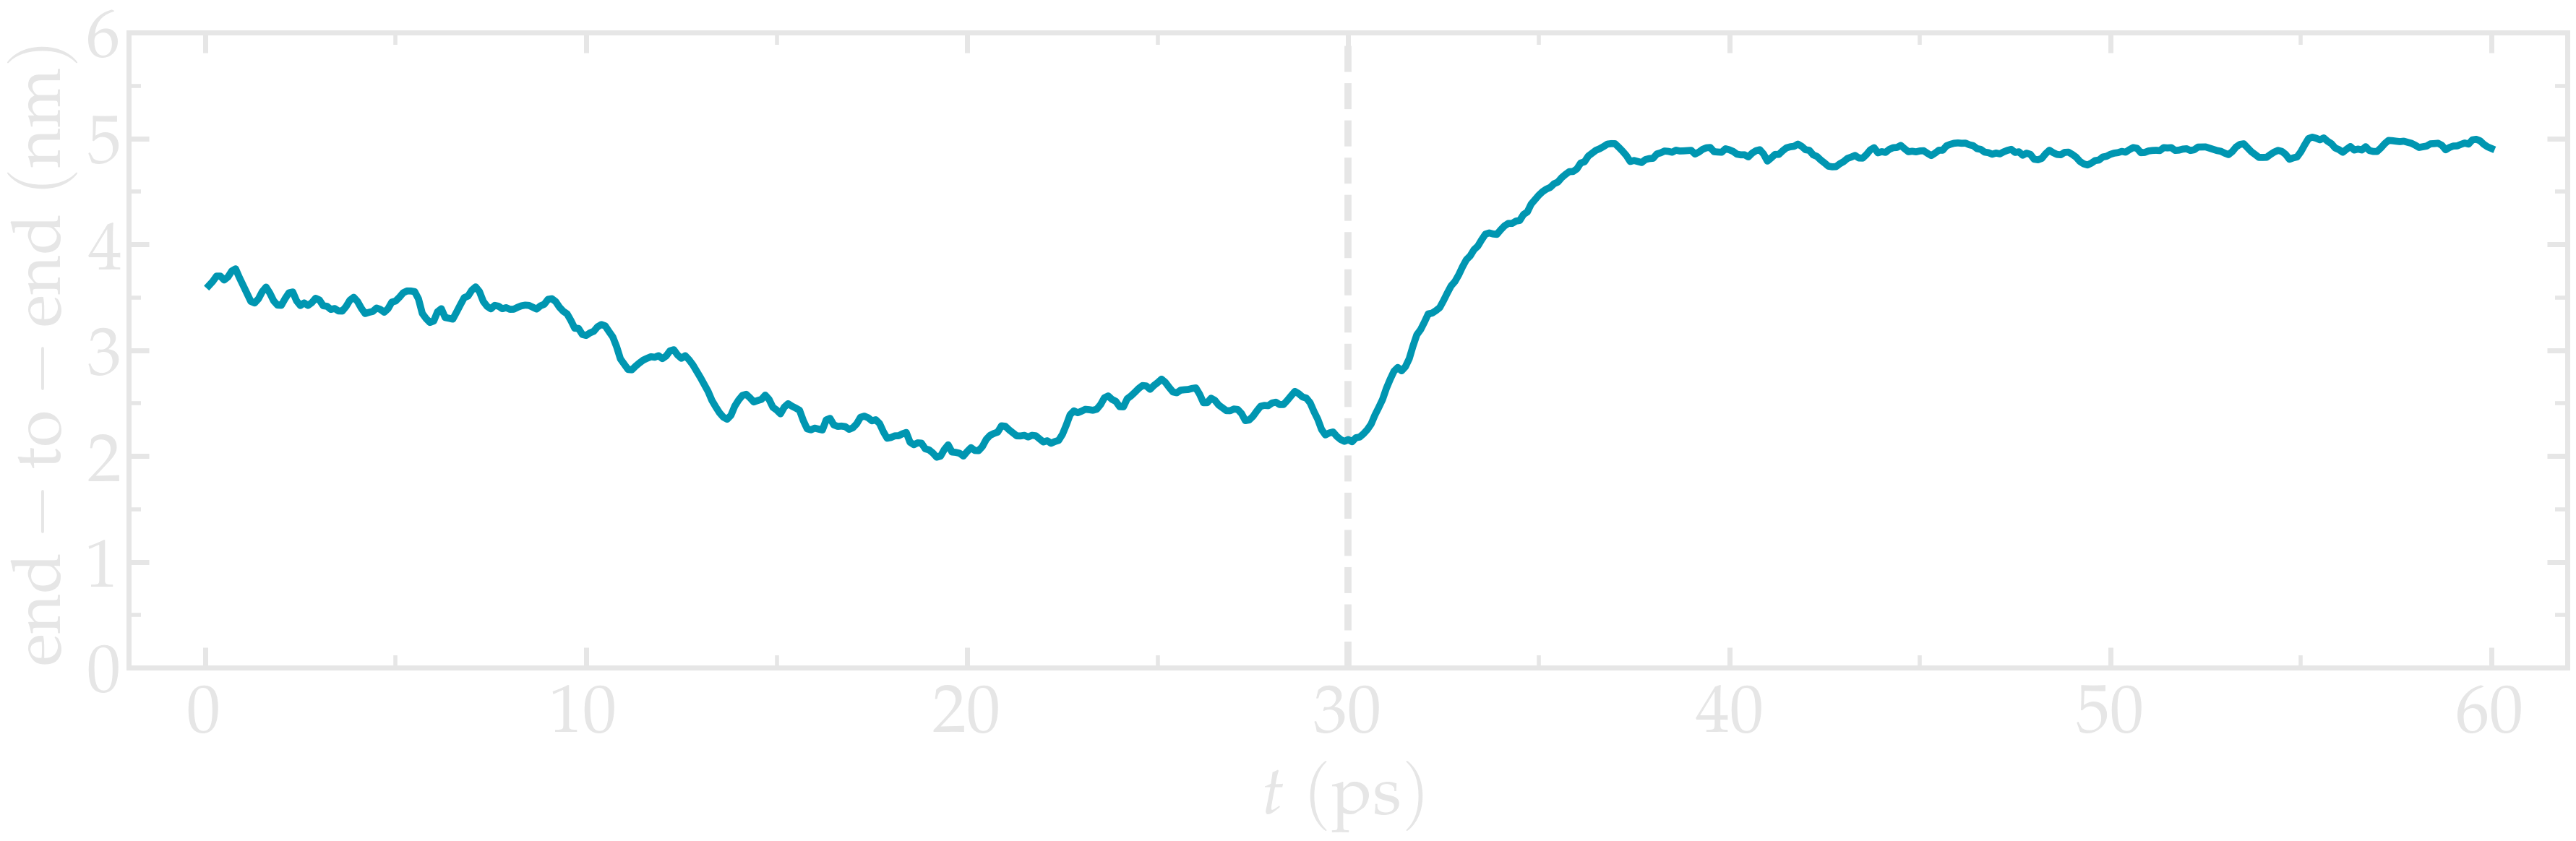 plot of the end-to-end distance versus time